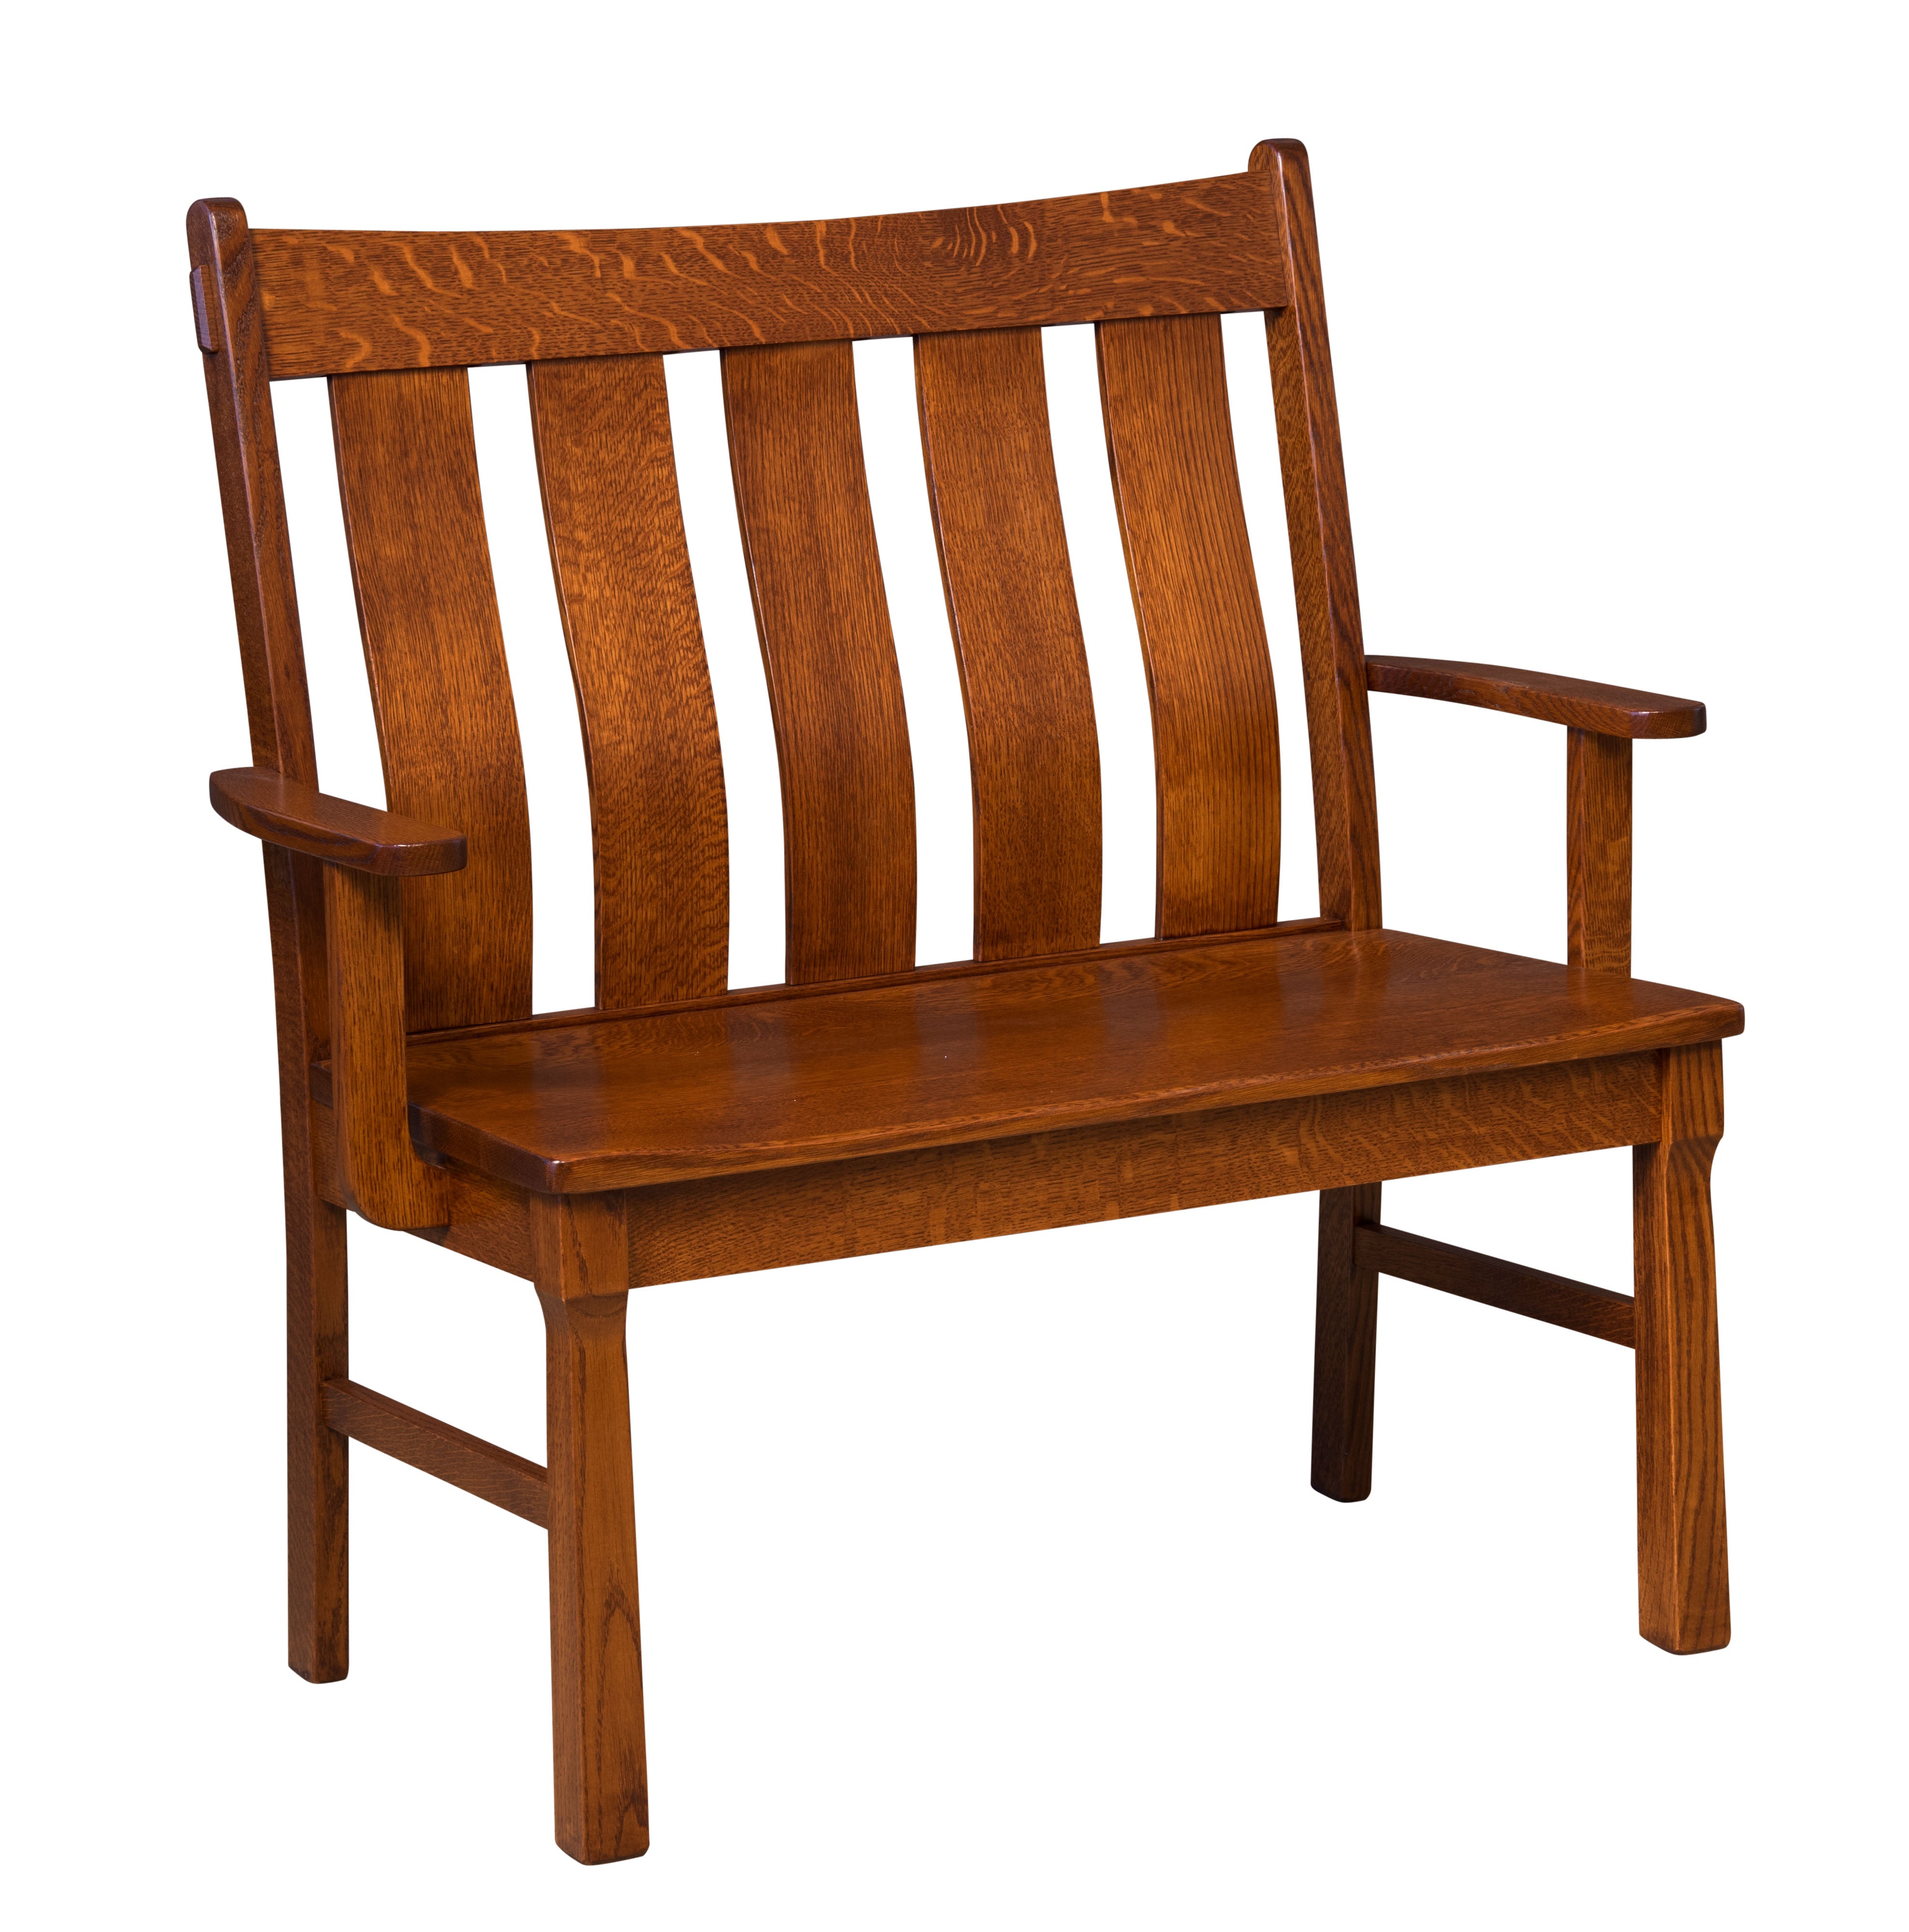 Amish Beaumont Bench